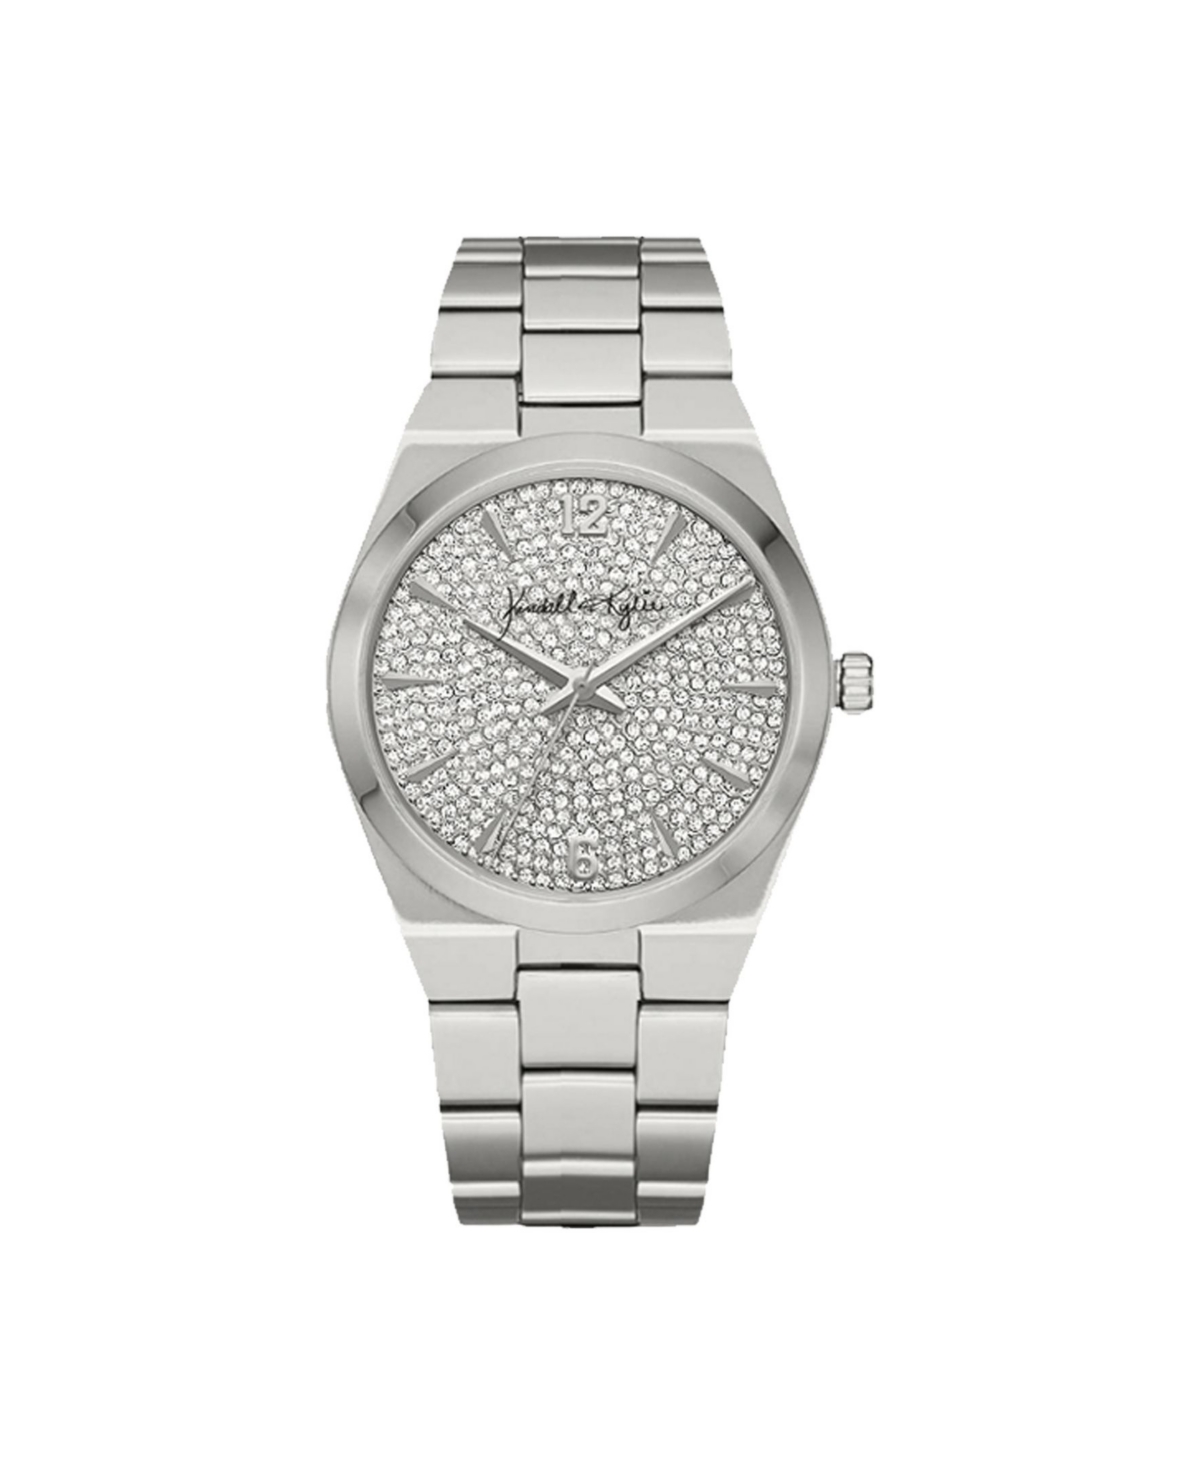 Kendall + Kylie iTouch Women's Kendall + Kylie Silver-Tone Metal Bracelet Watch